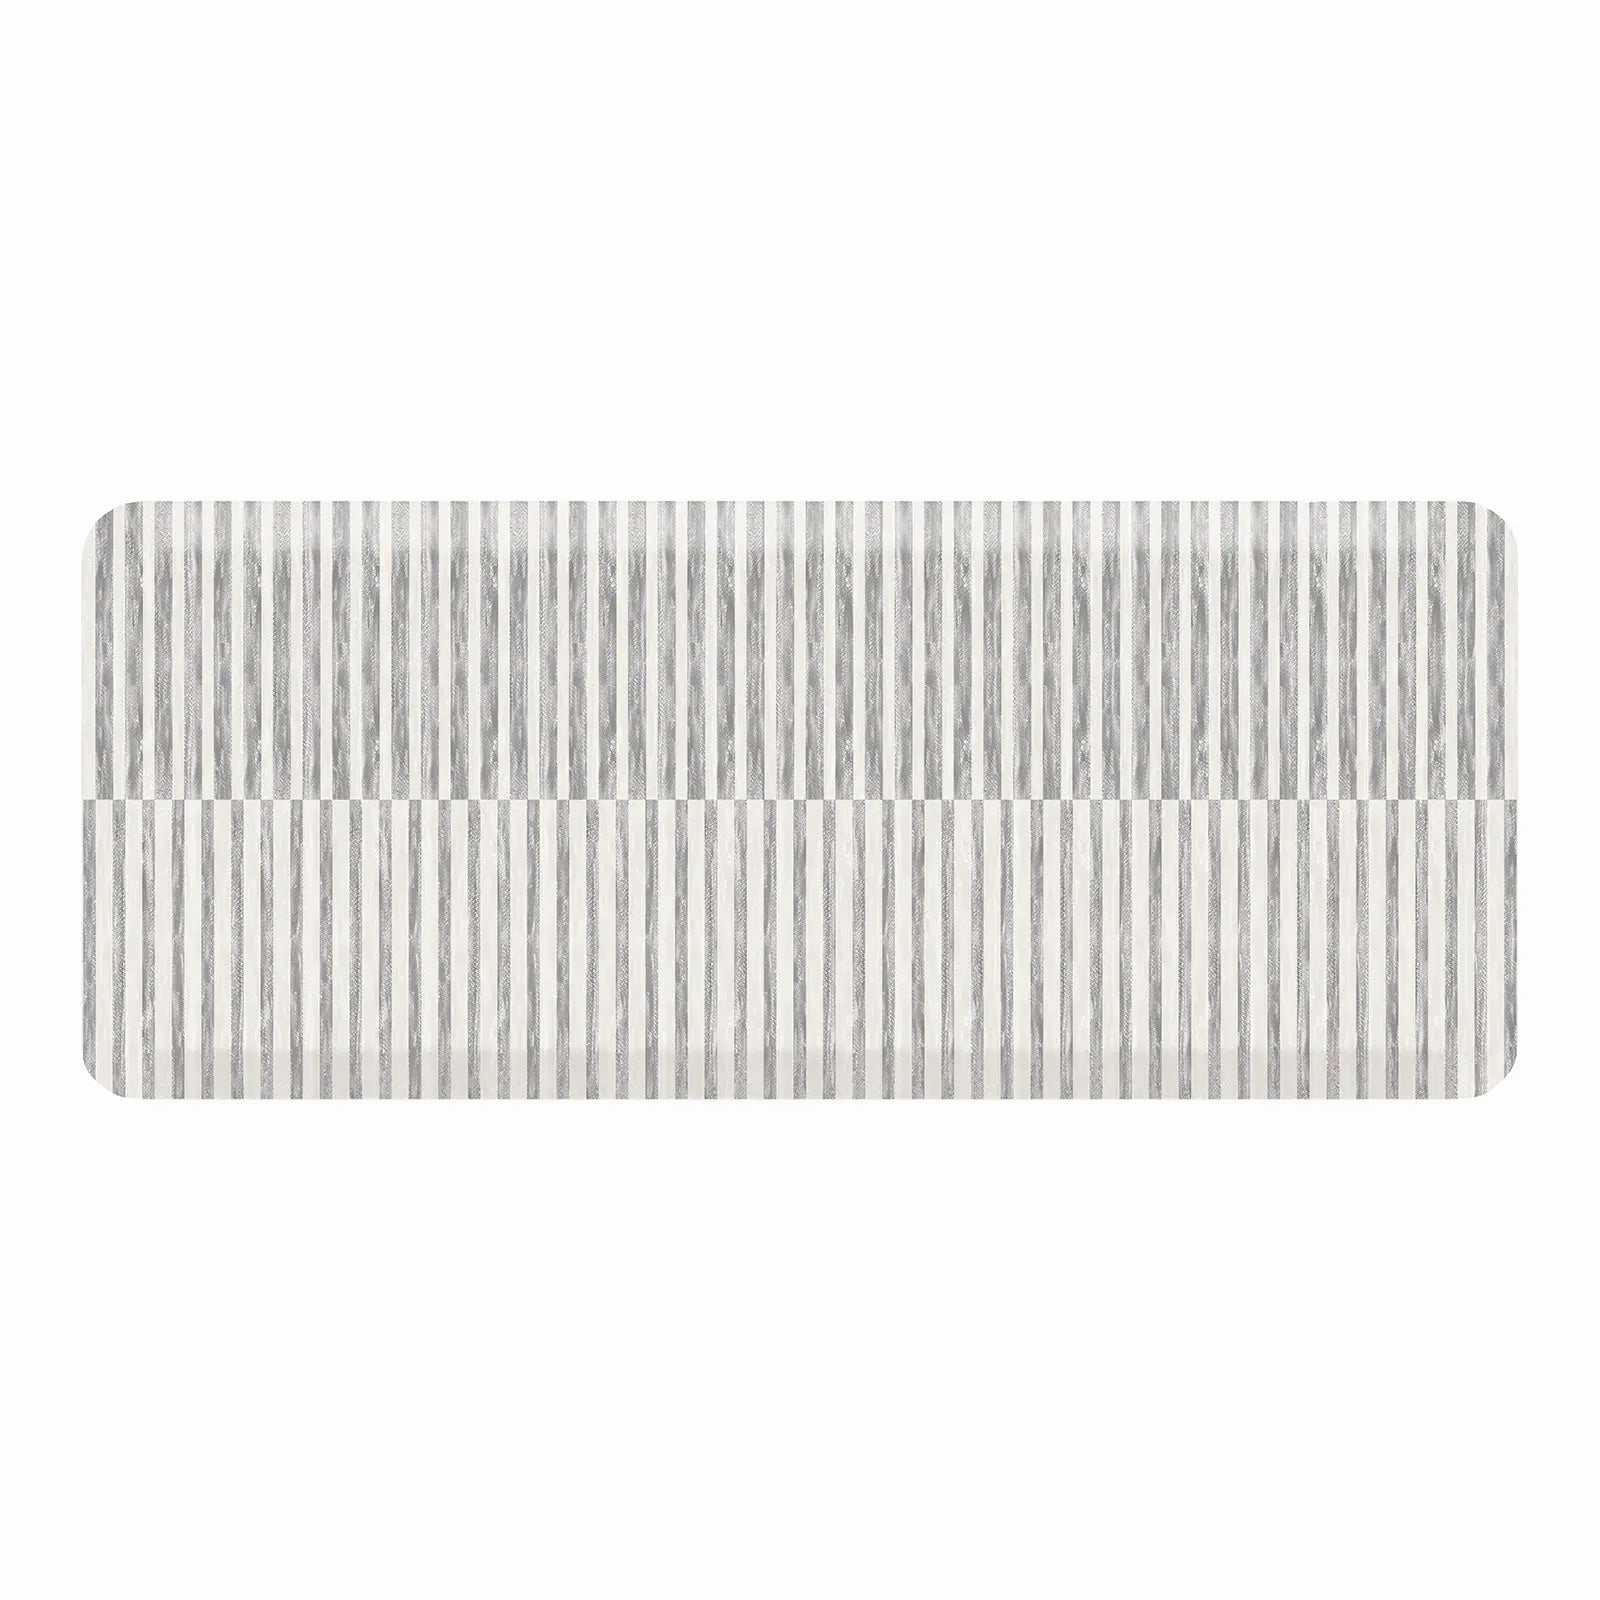 Reese pewter gray and white inverted stripe standing mat shown in size 22x54